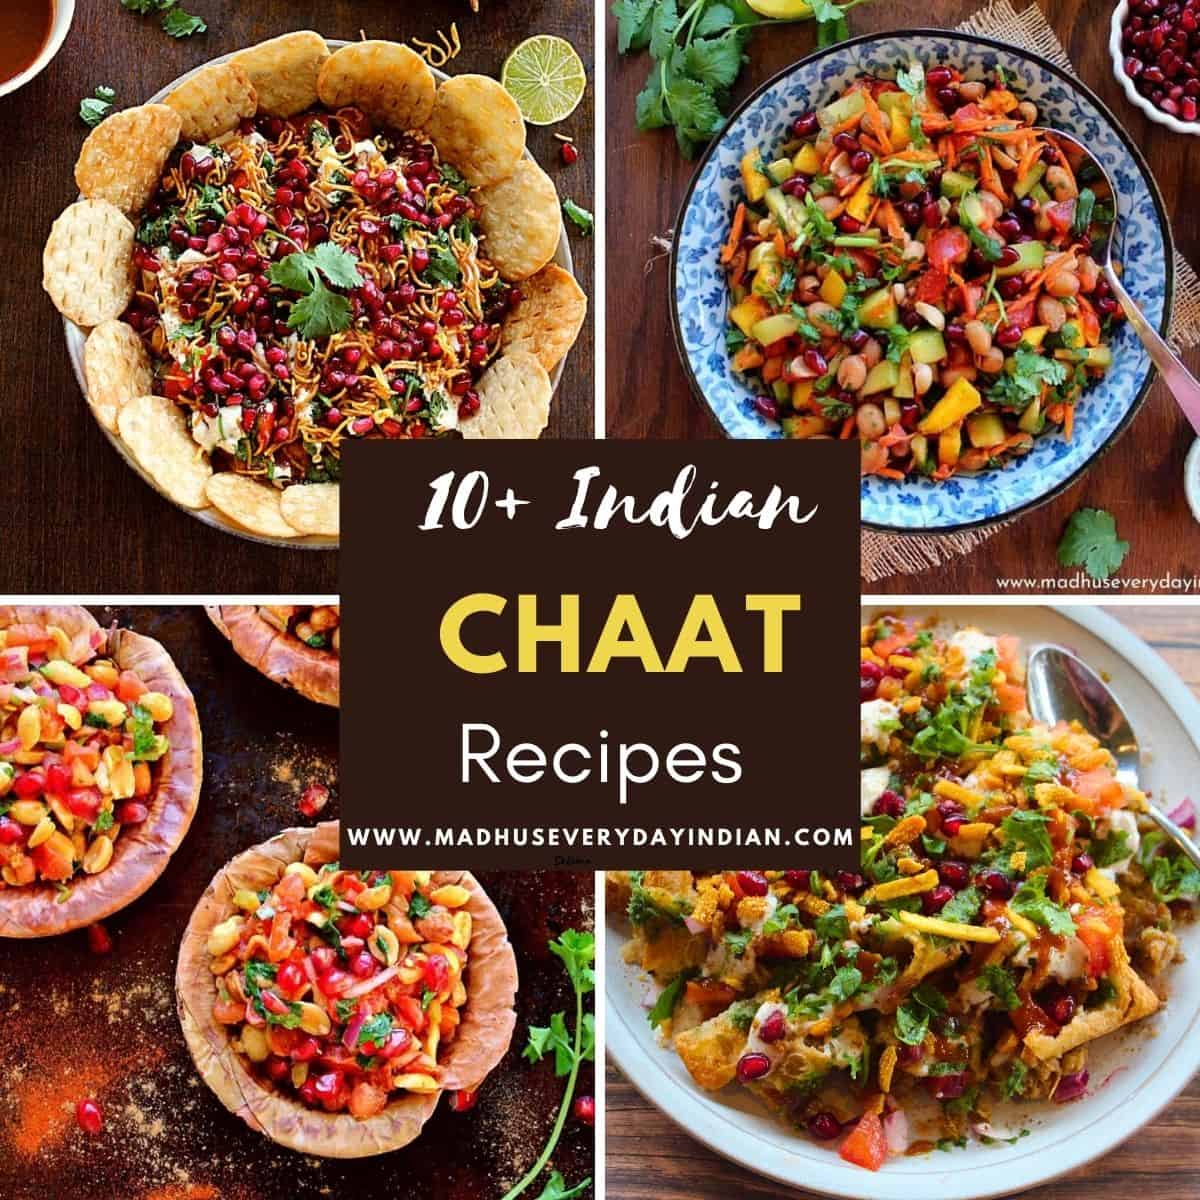 10 Indian Chaat Recipes - Madhu's Everyday Indian